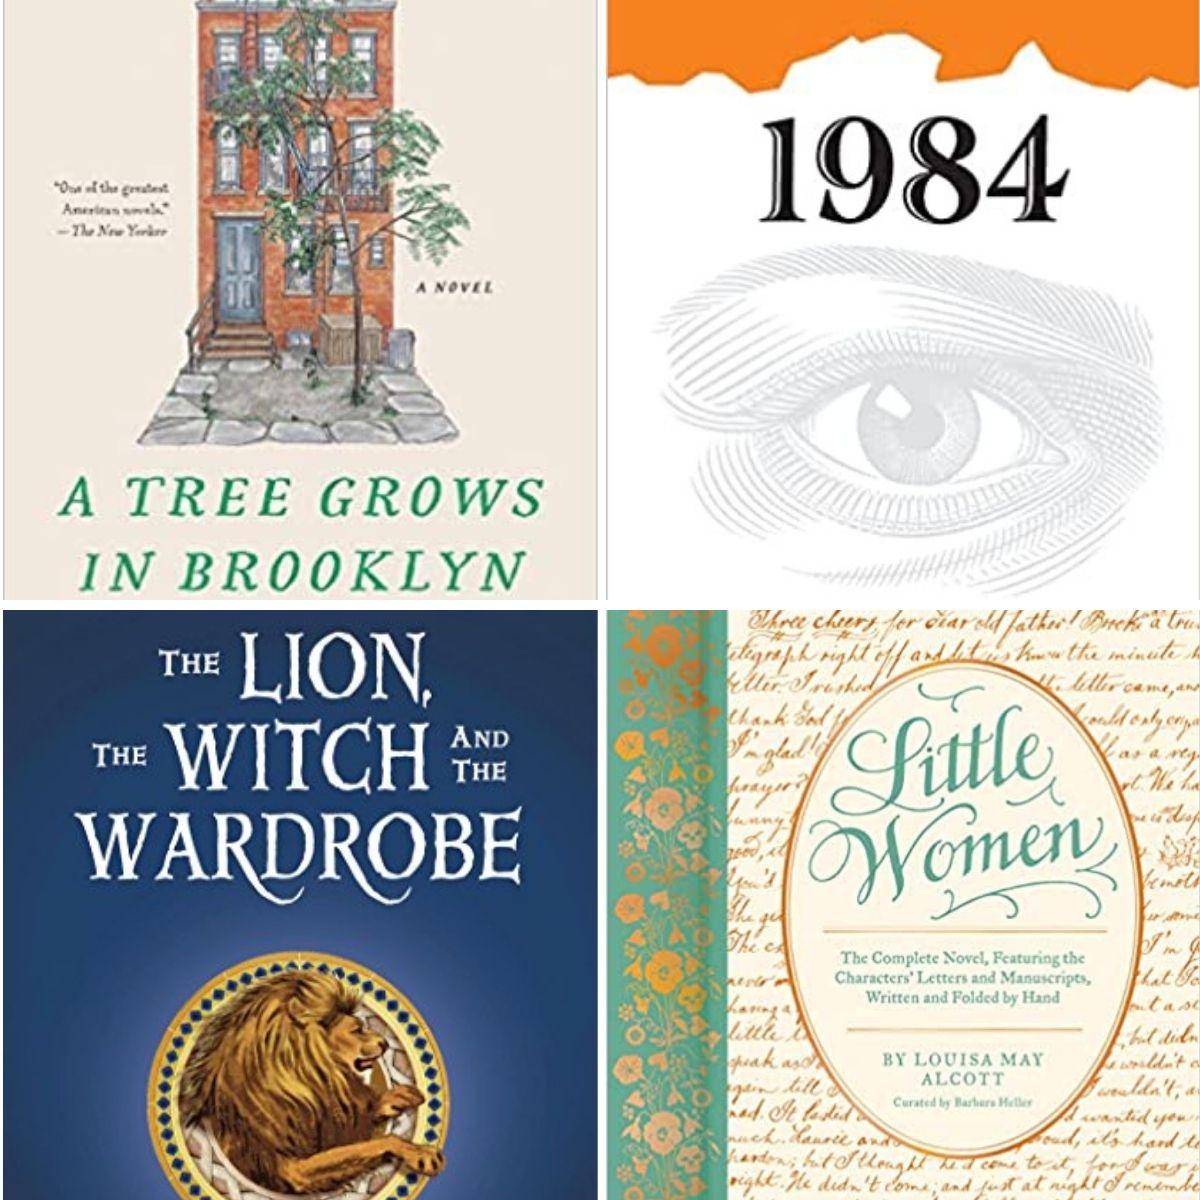 Collage of four book covers: A Tree Grows in Brooklyn, 1984, The Lion The Witch and the Wardrobe, and Little Women.